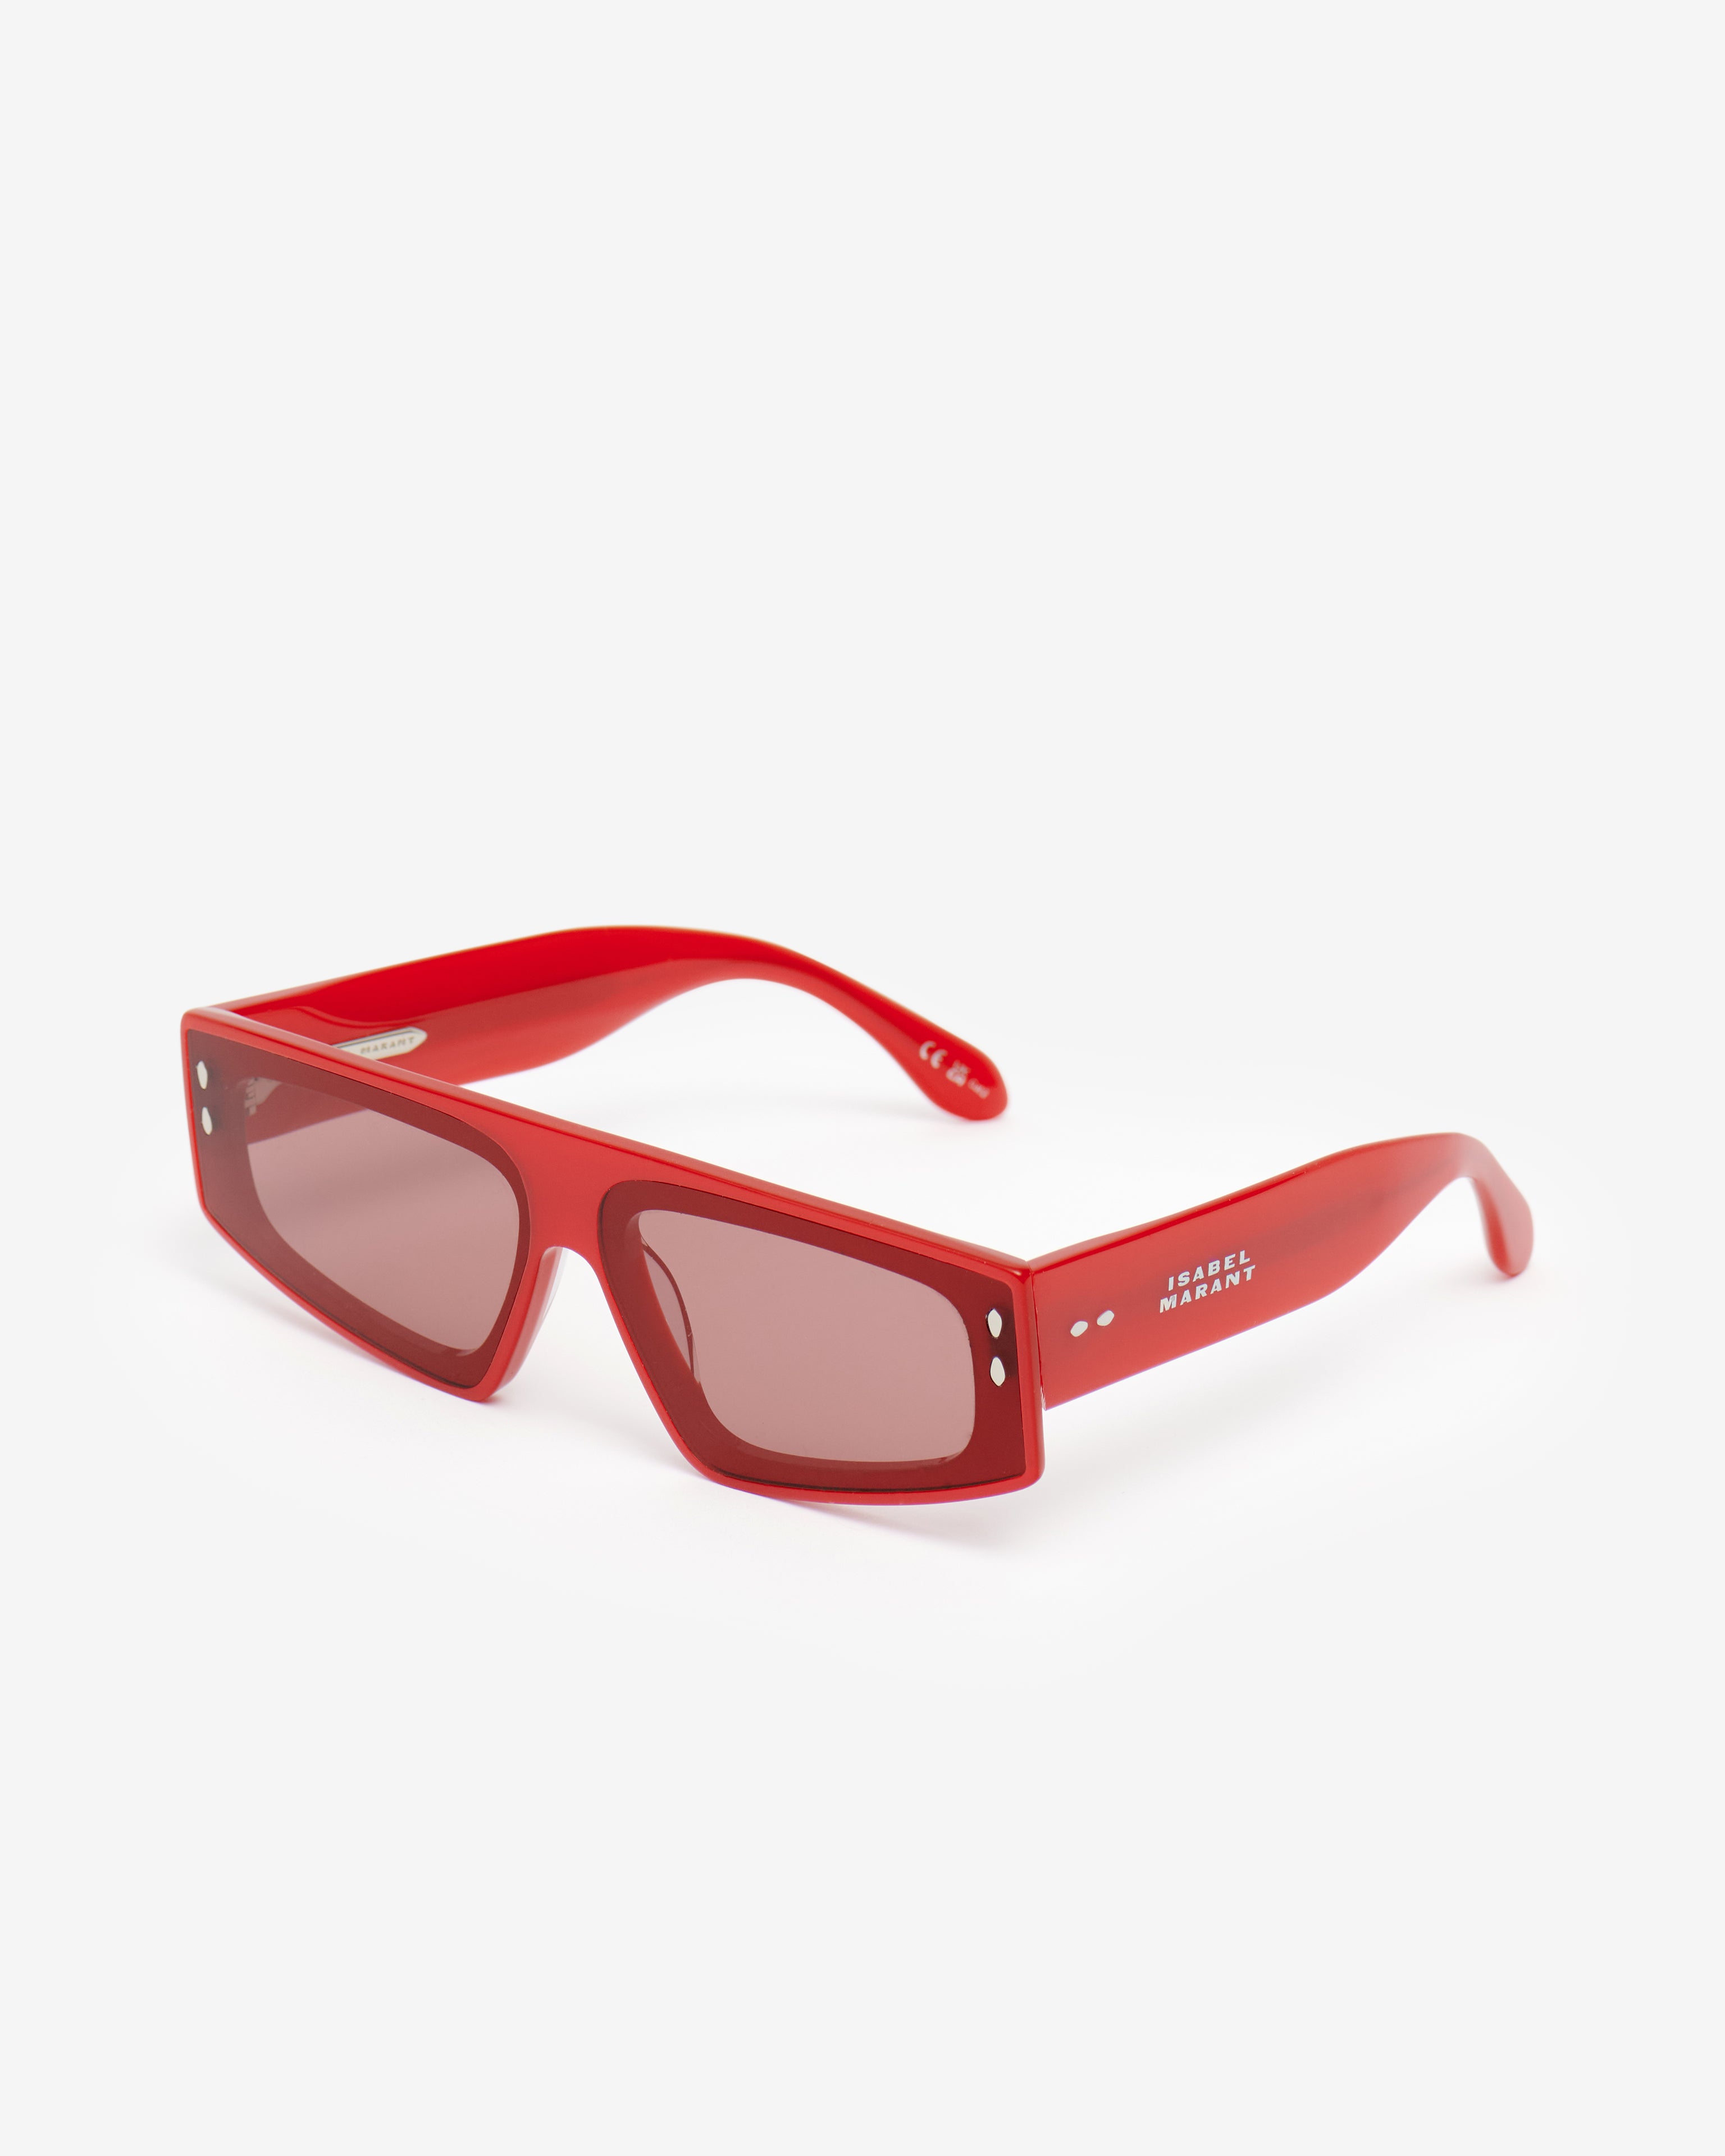 Sonnenbrille zoomy Woman Pearled red-burgundy 1